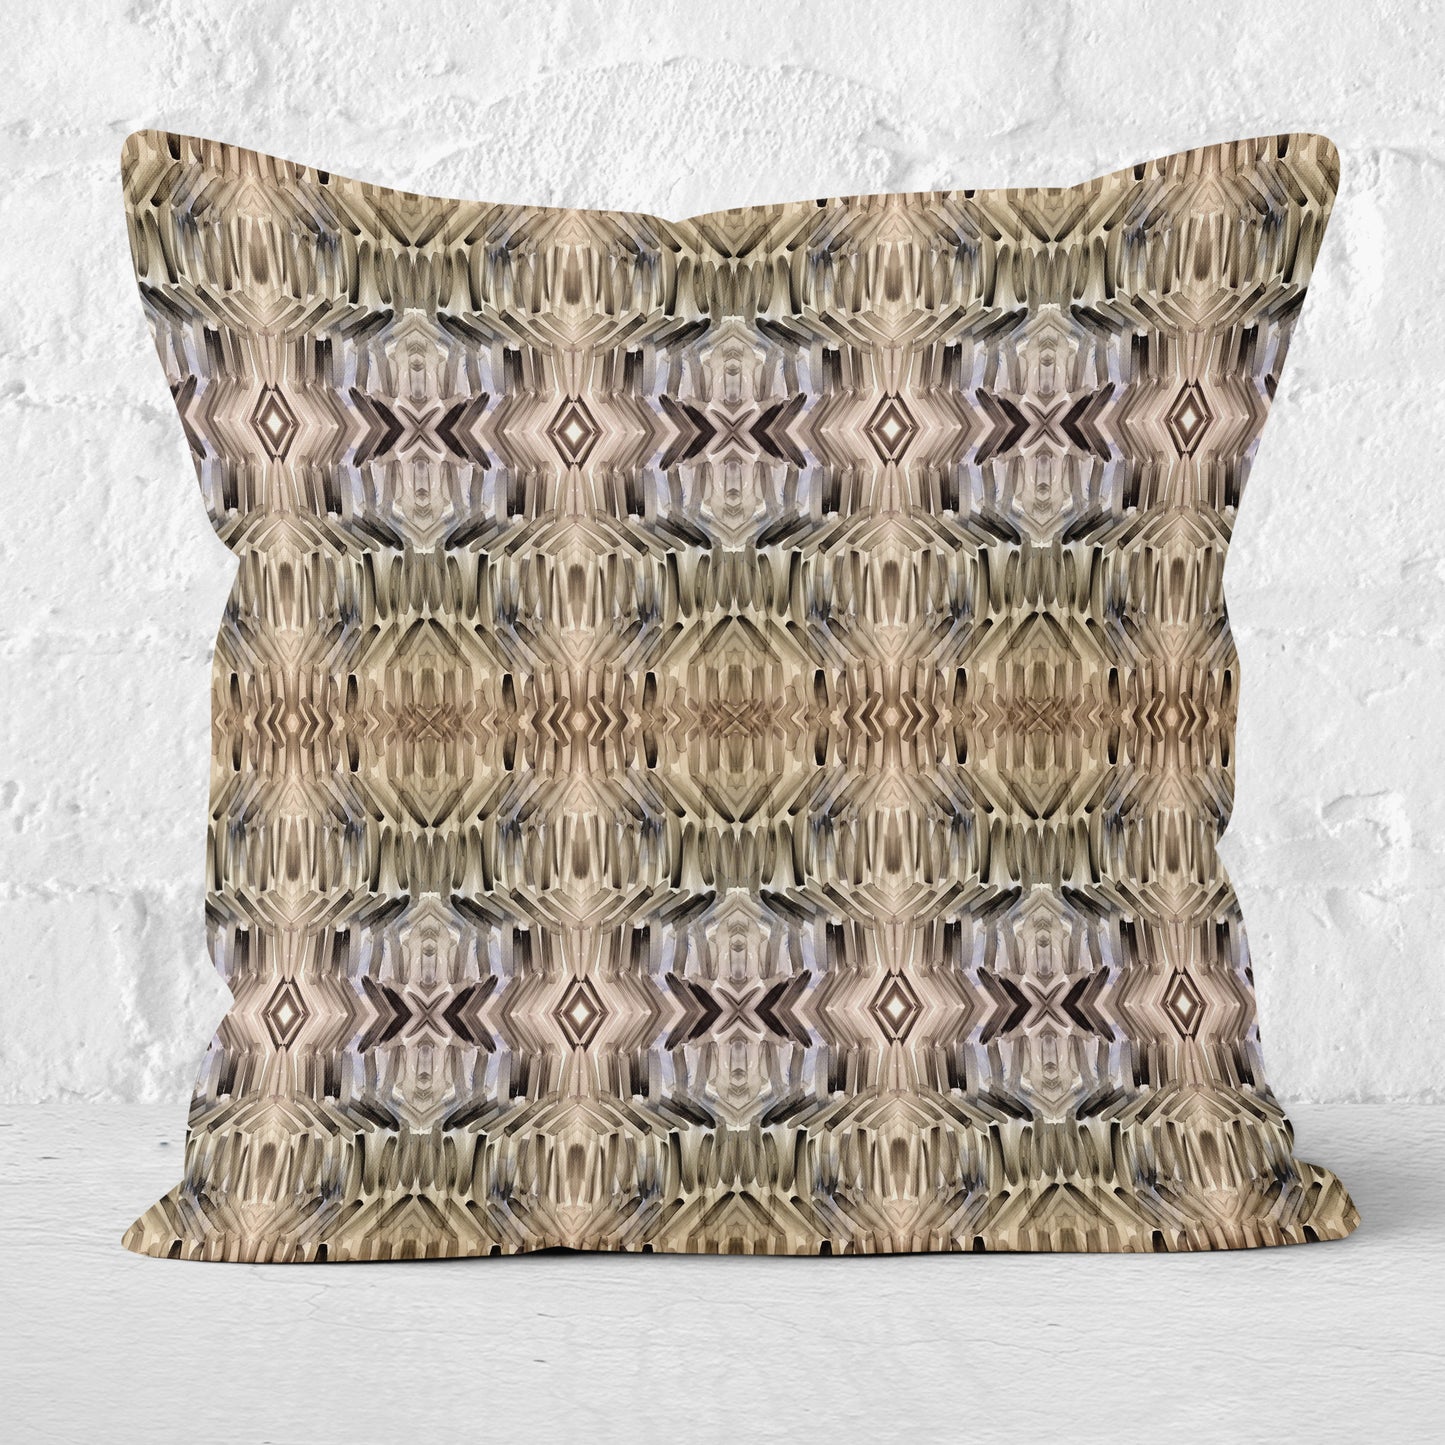 Pillow featuring abstract hand-painted pattern in neutral tones with white brick wall in background